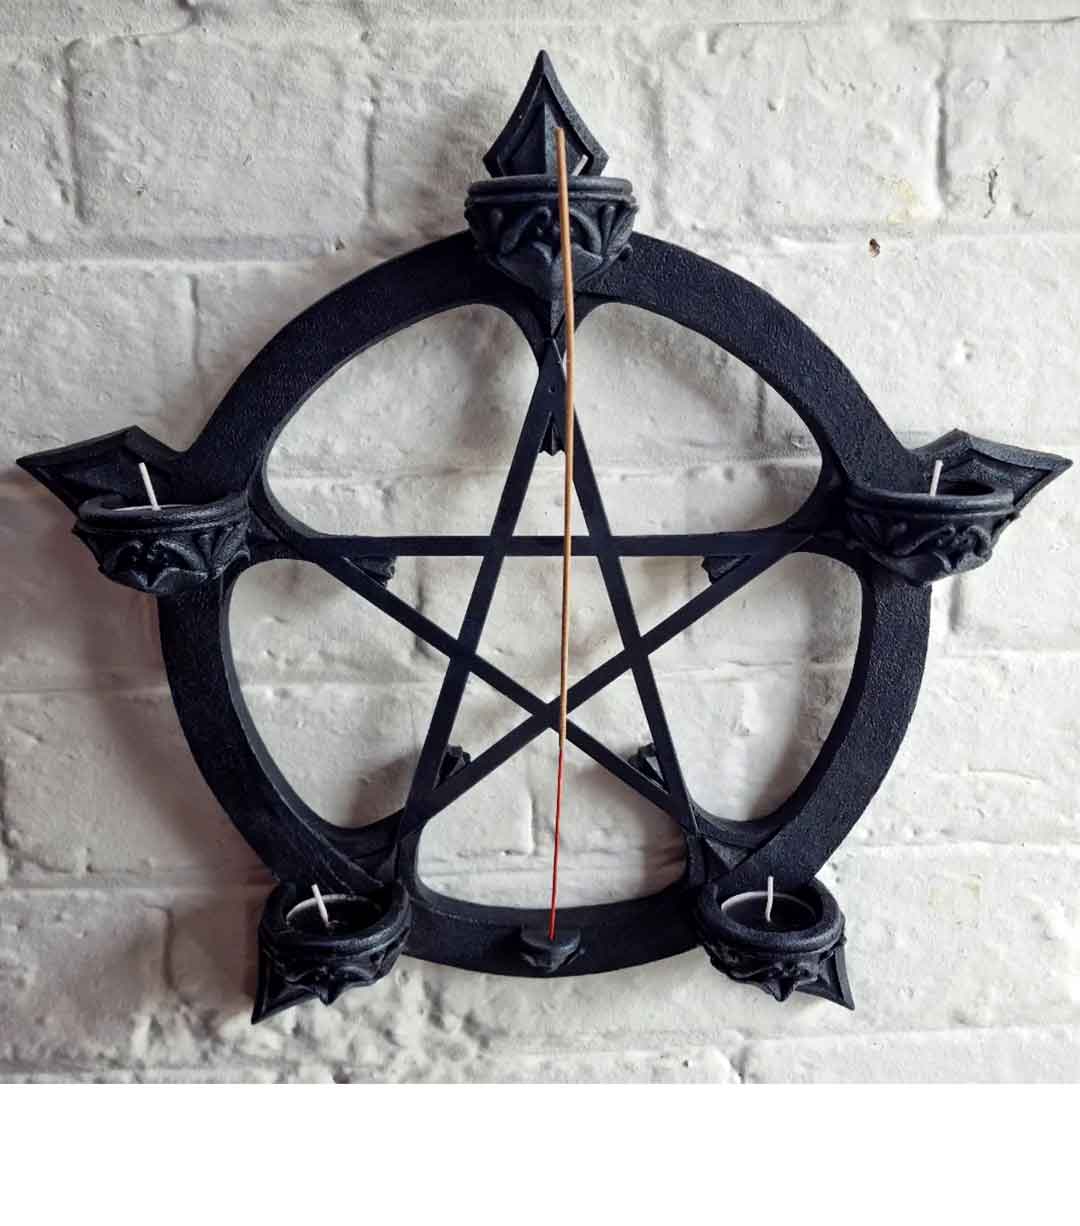 Black Pentagram, wall mounted with tea light holders at each of the points